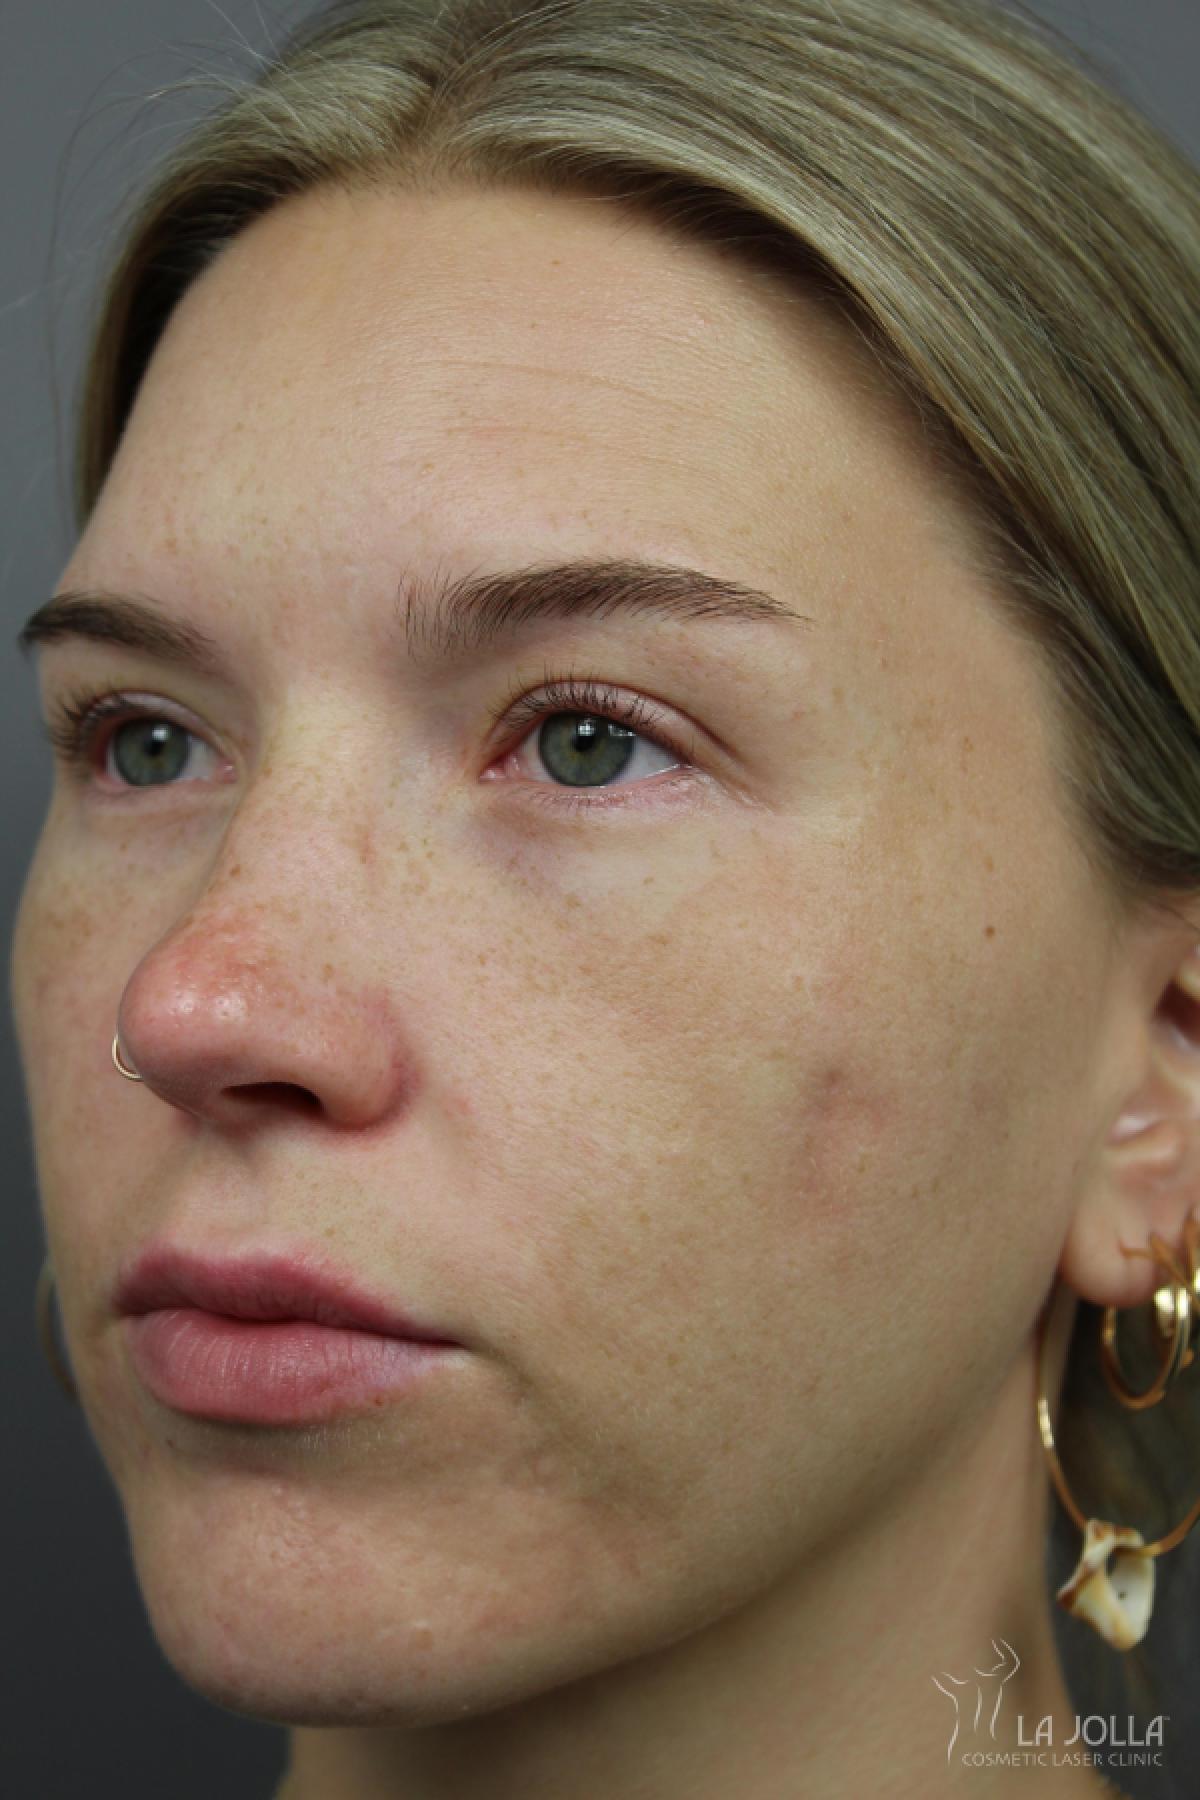 Acne Scars: Patient 2 - After 3